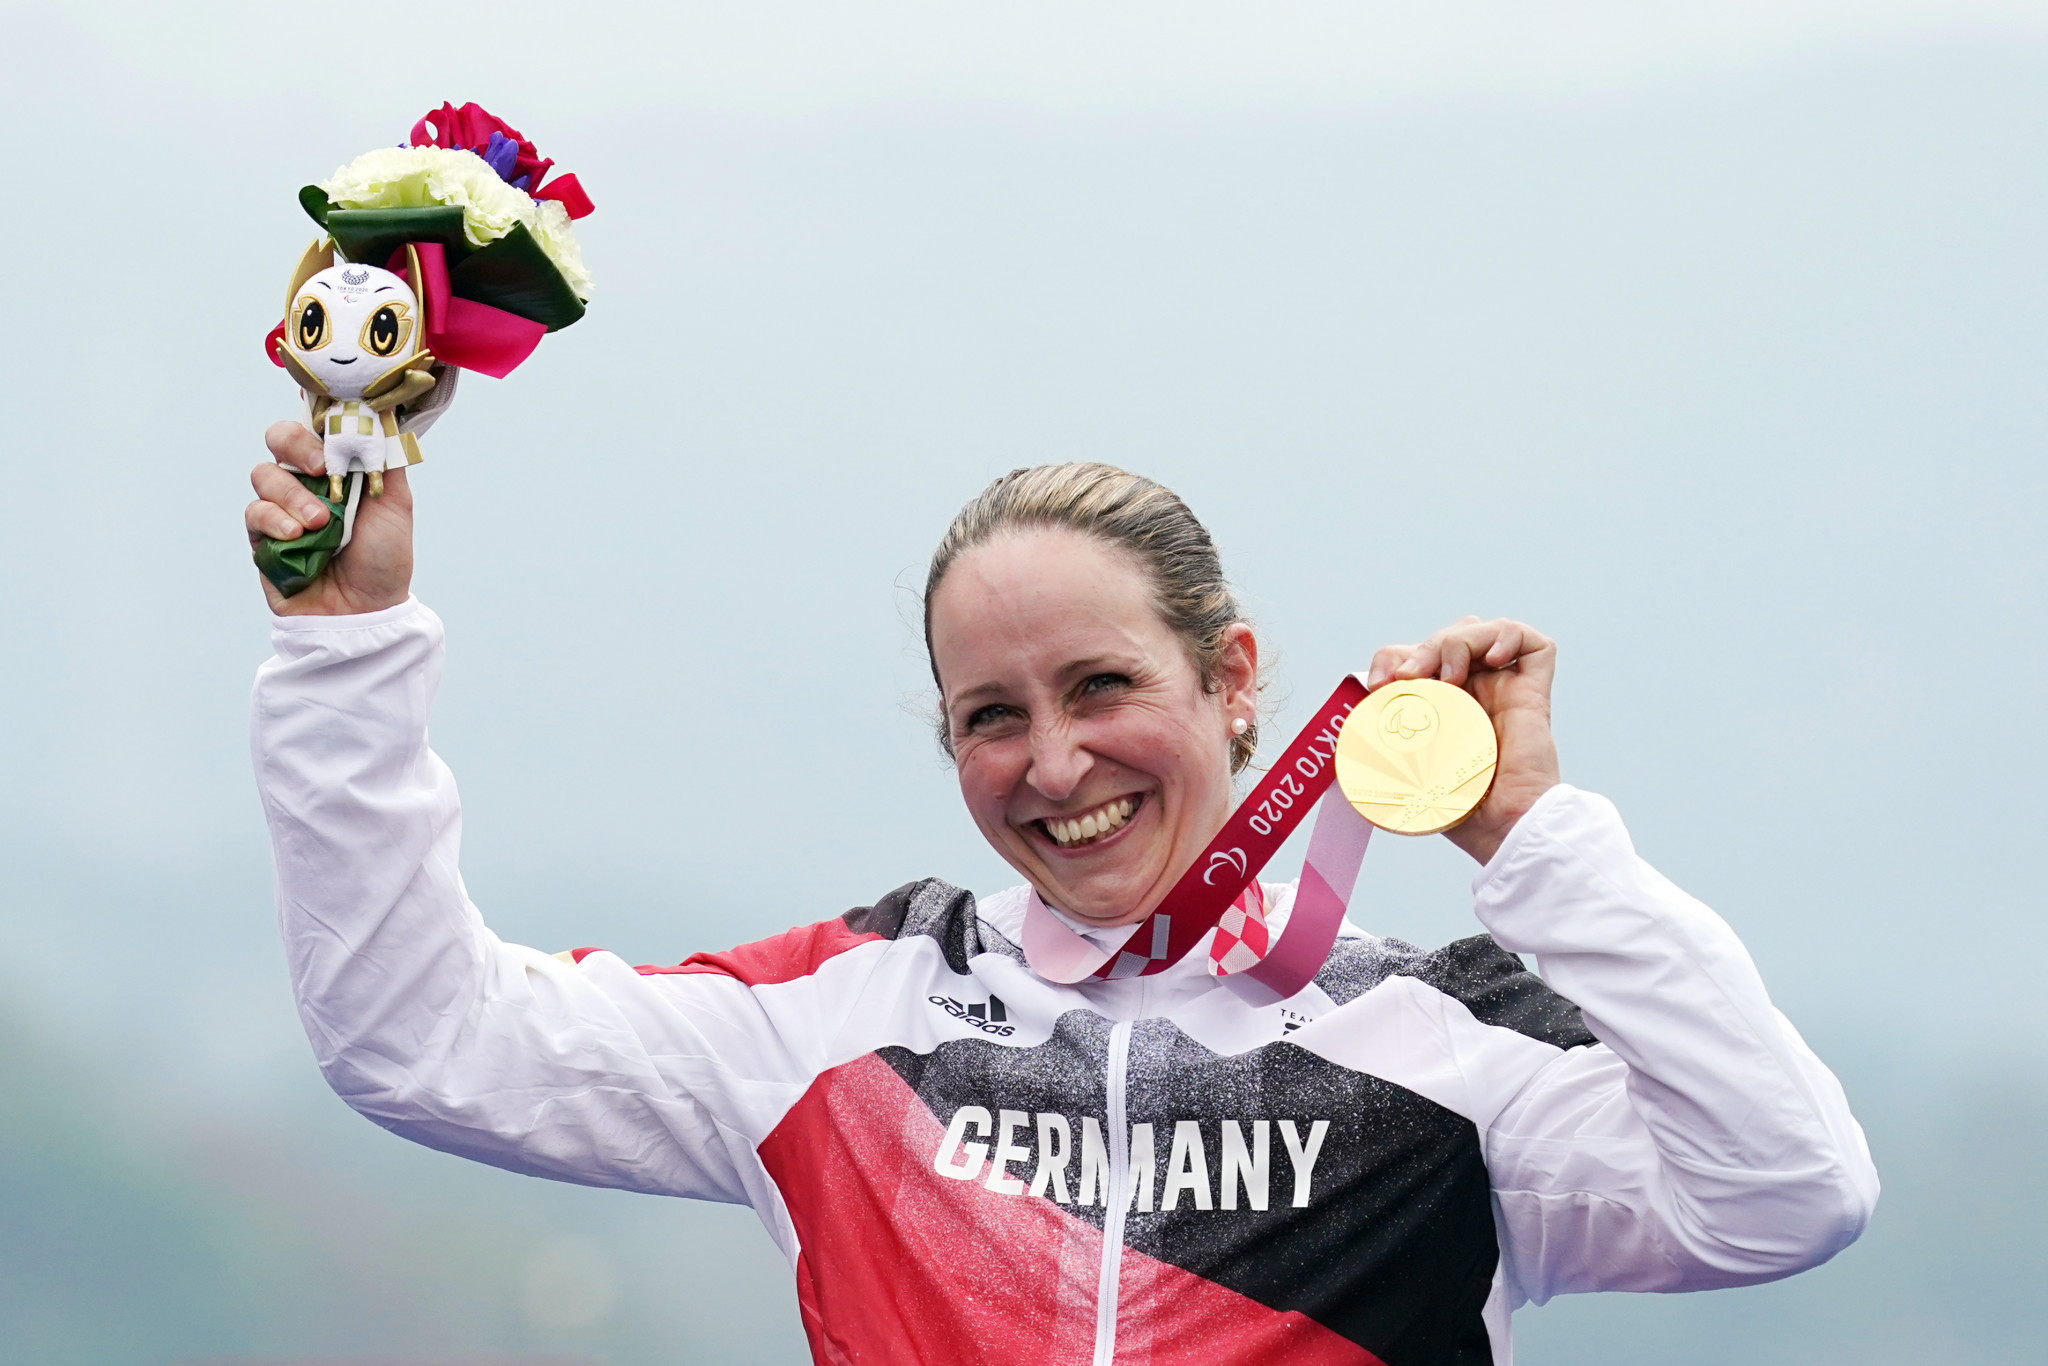 Annika Zeyen has been recognised for her achievements again at the Paralympics ©Getty Images